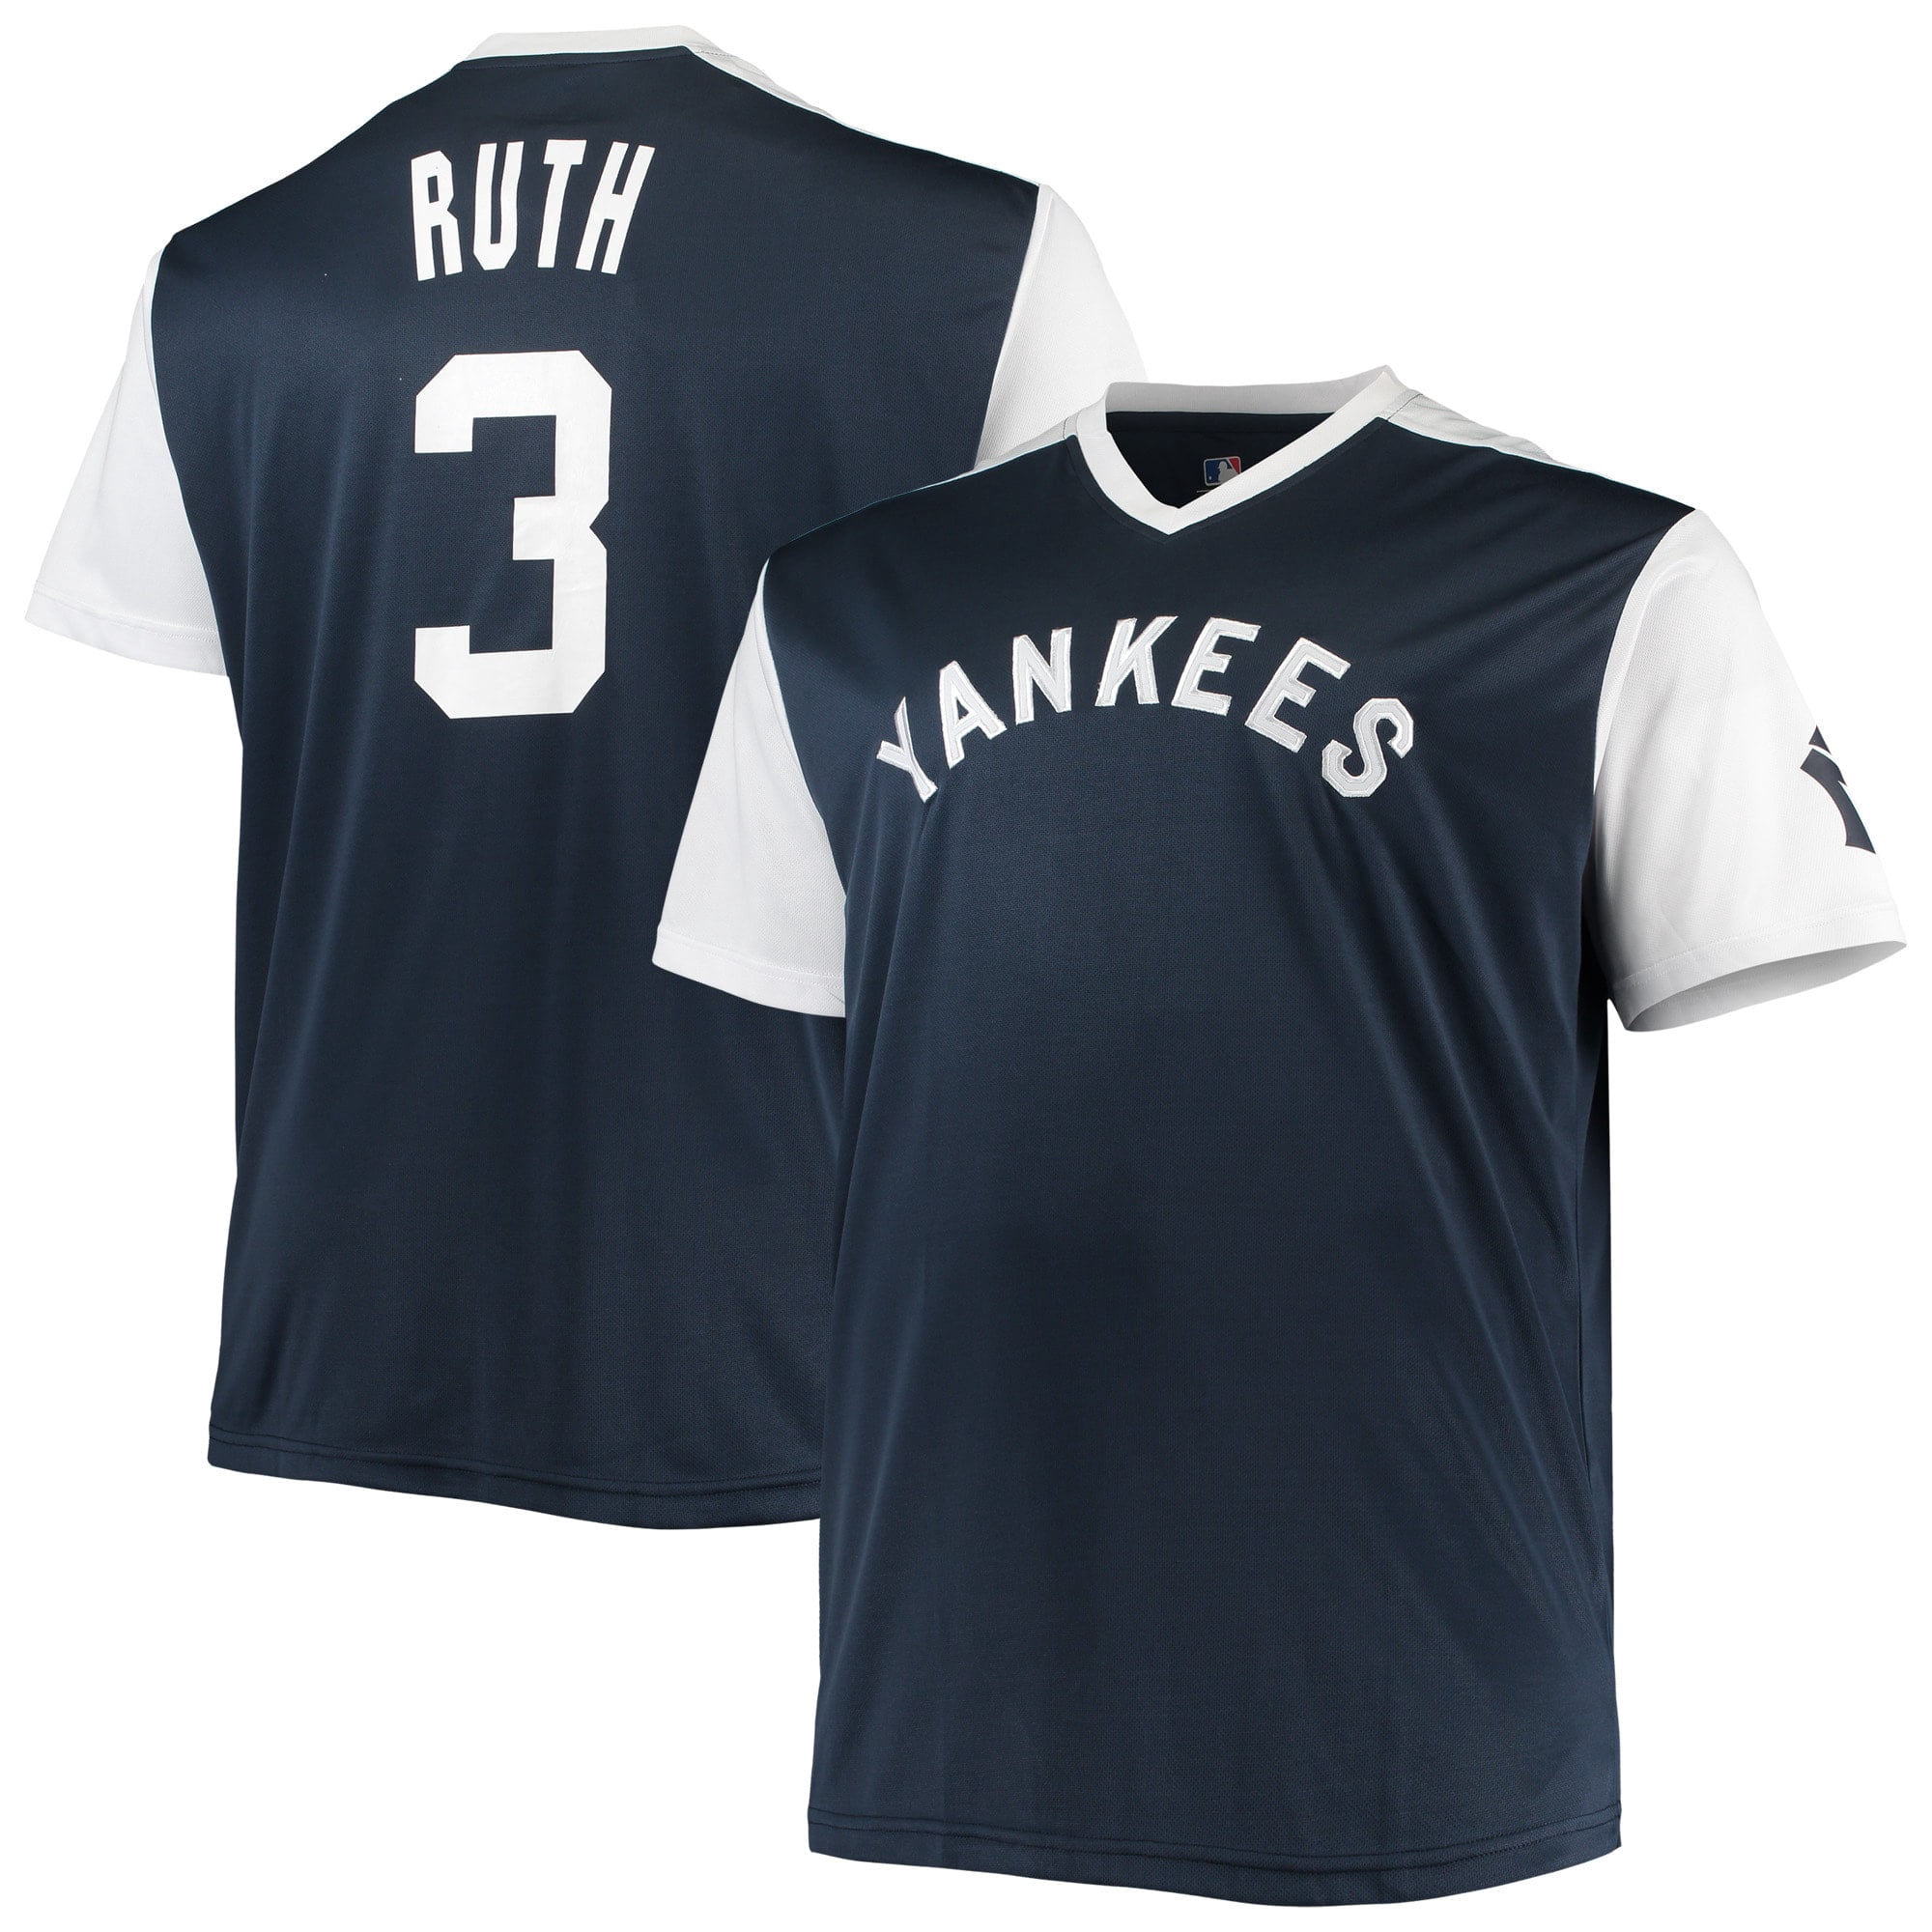 Men's Babe Ruth Navy/White New York Yankees Cooperstown Collection